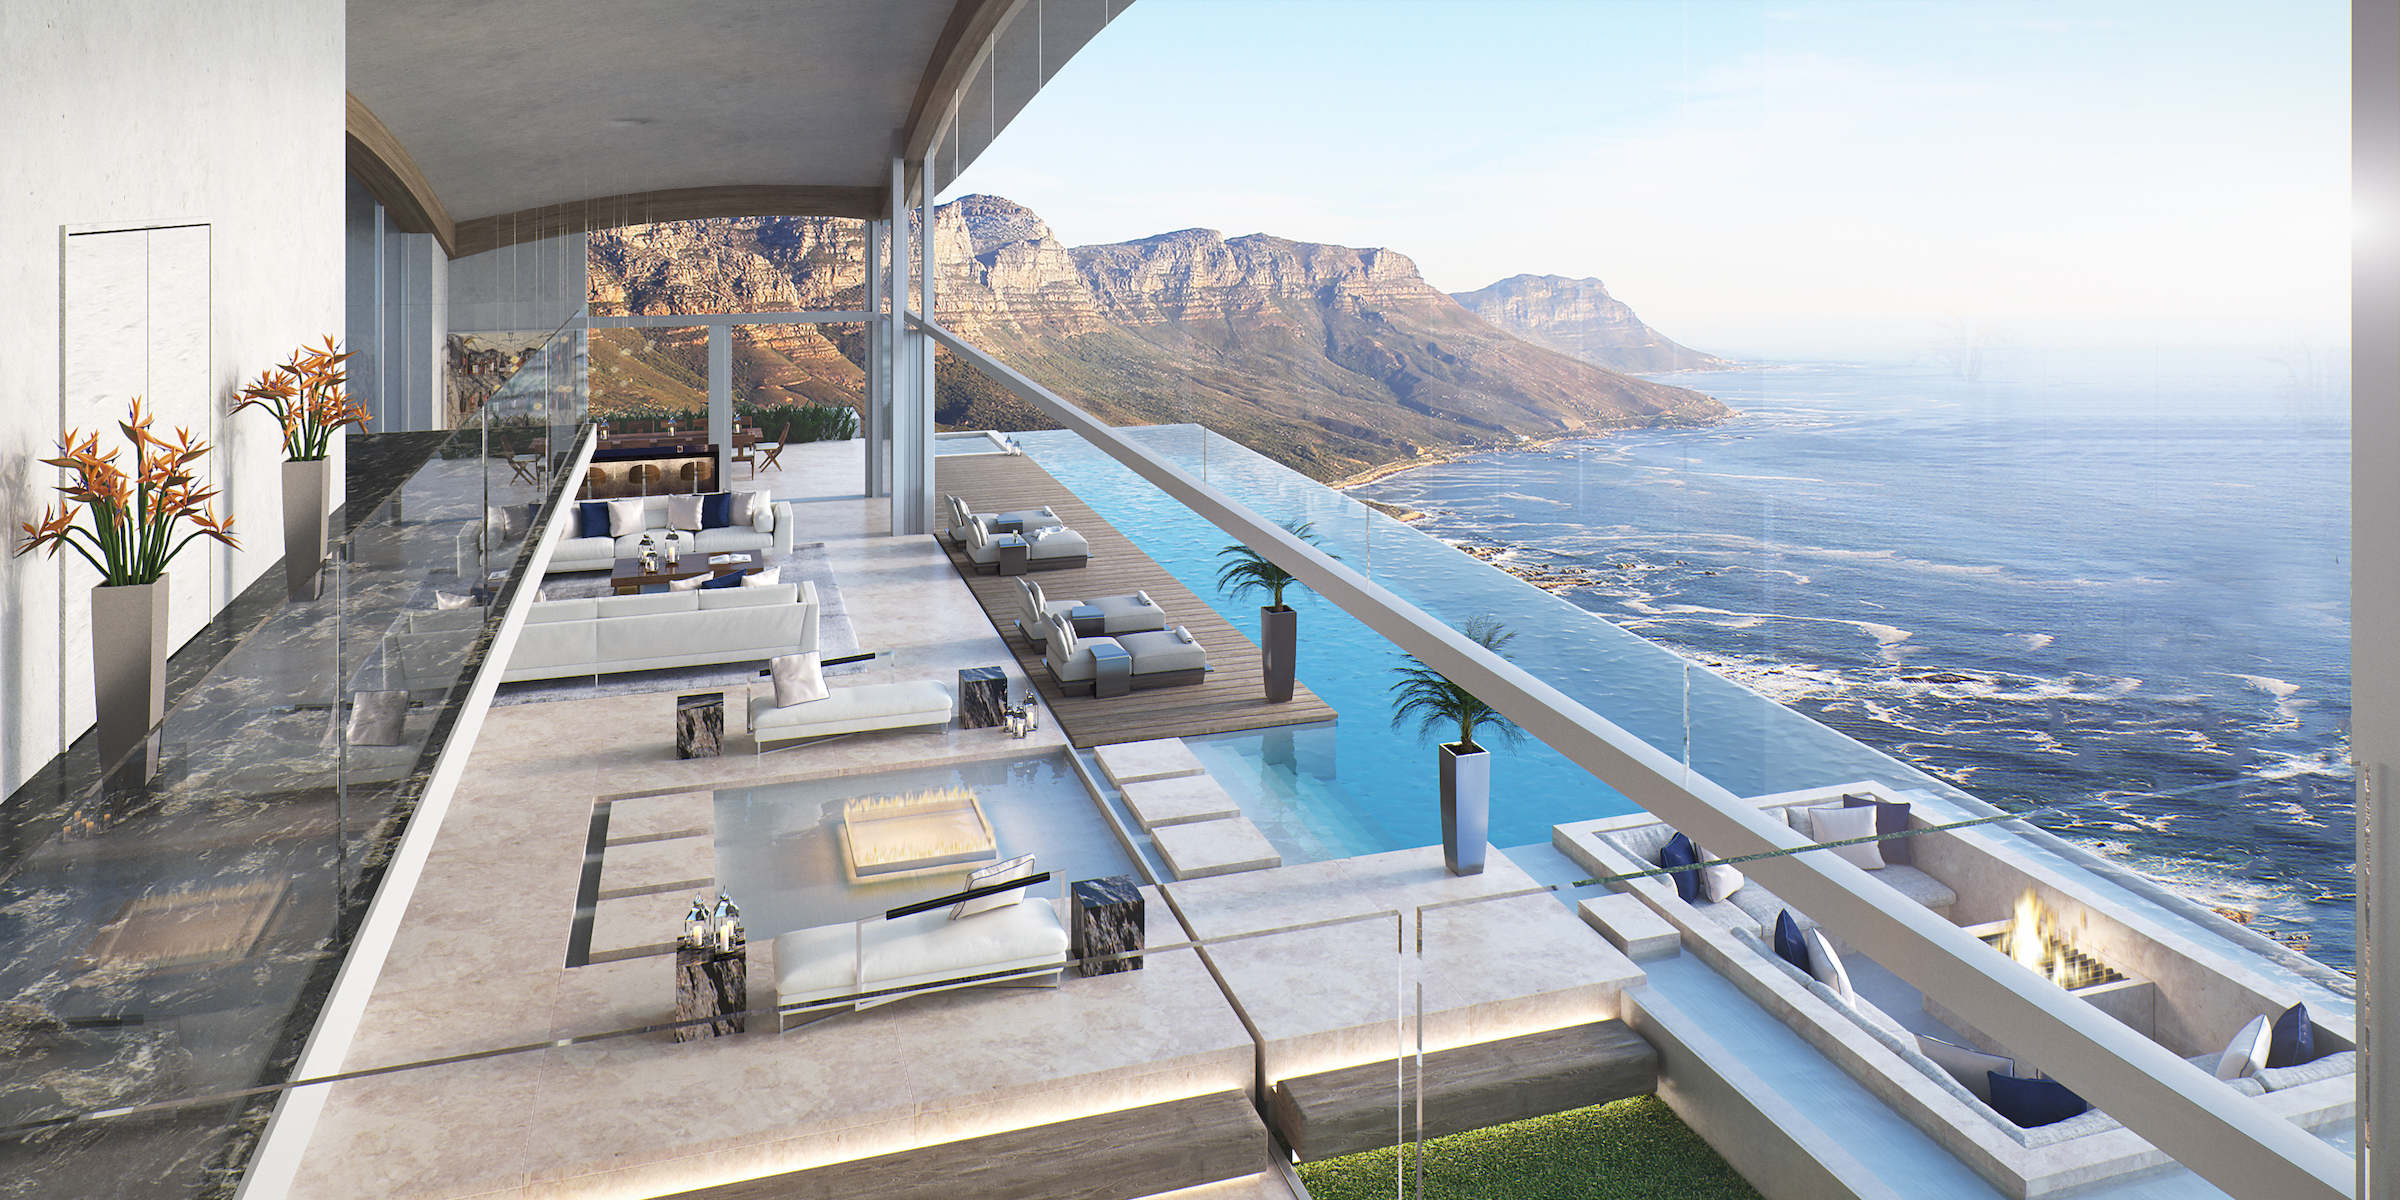 A villa in Cape Town designed by Katharine Pooley, one of the world's top interior designers